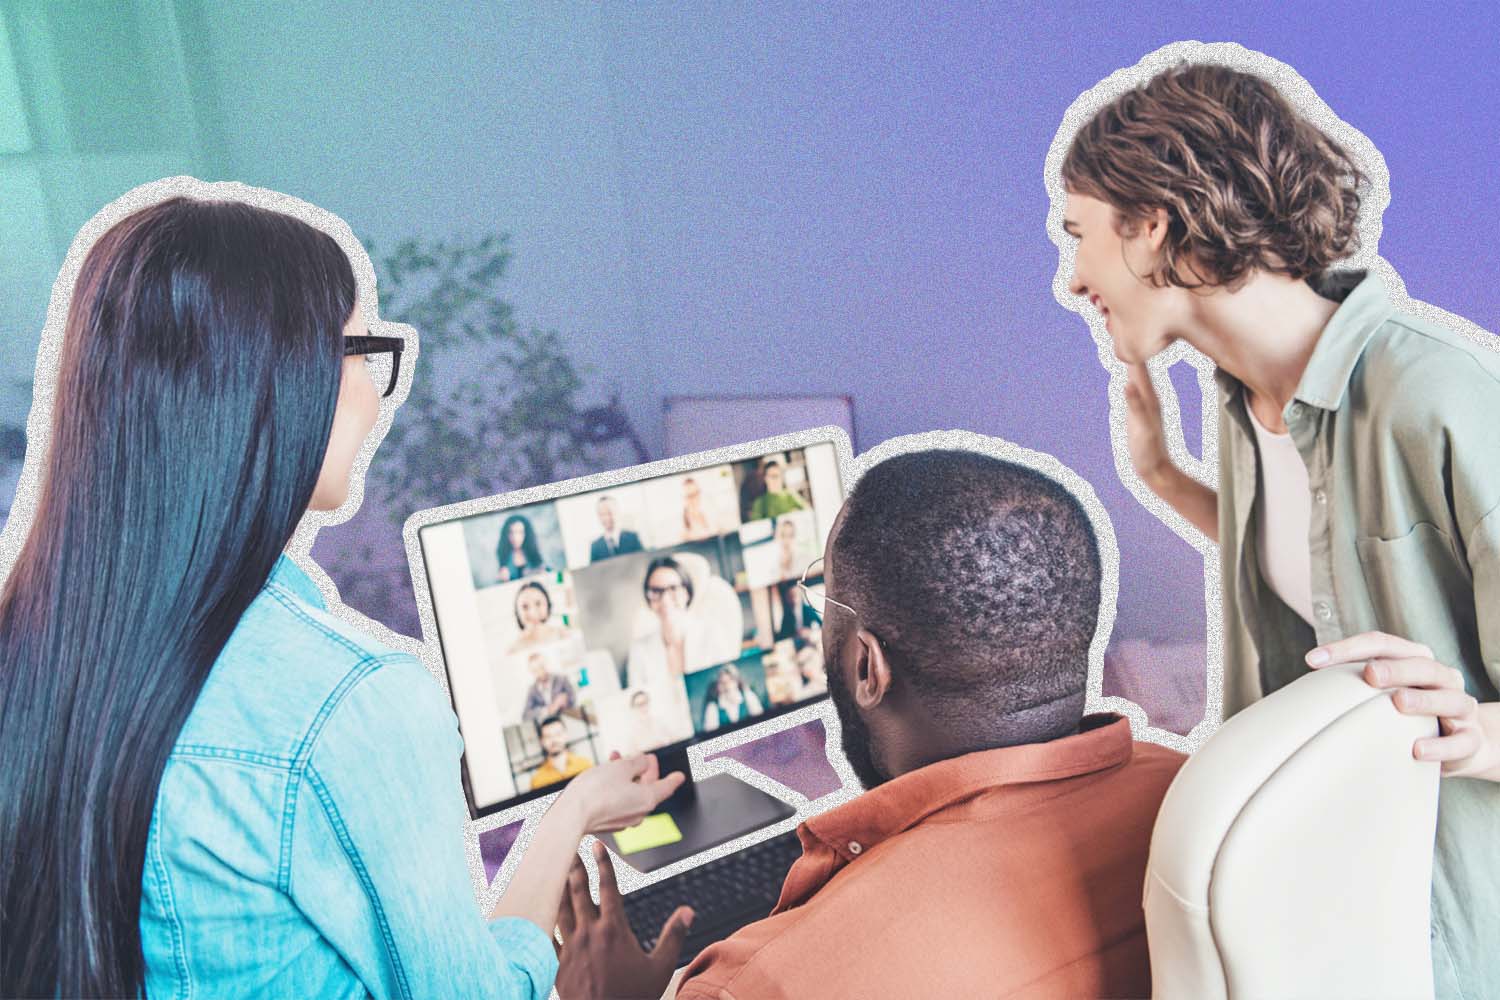 Three people gathered around a computer for a meeting